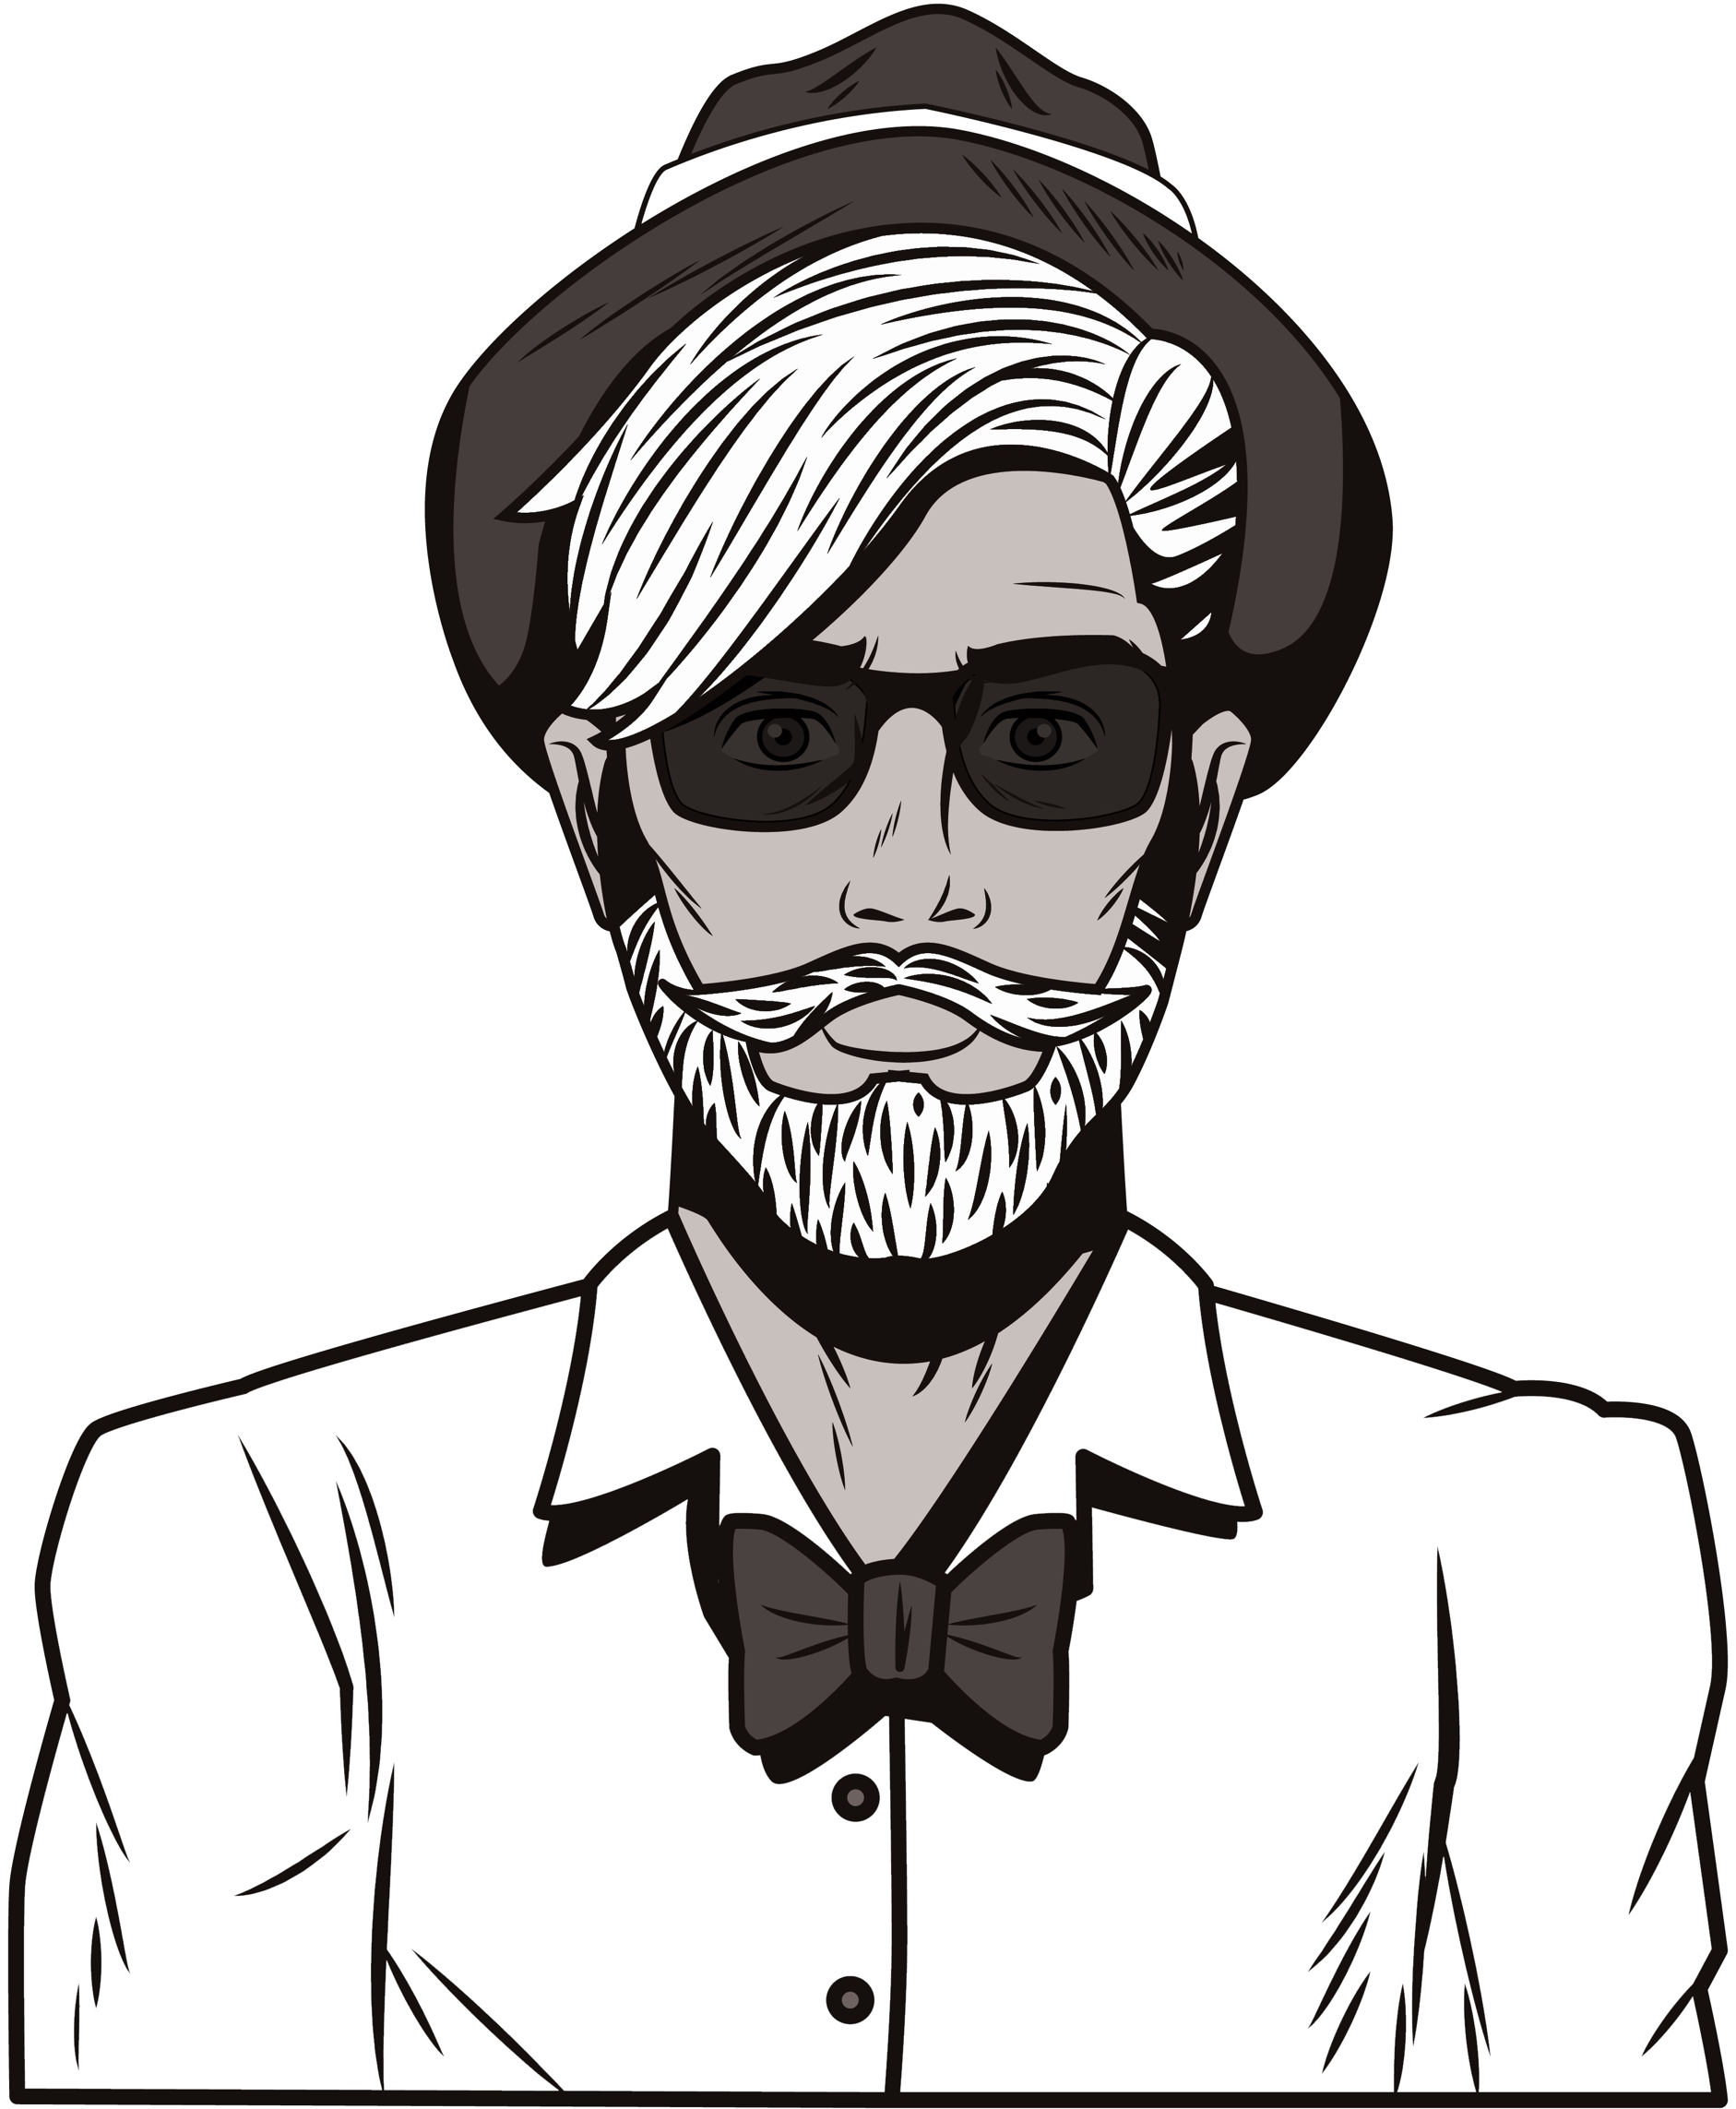 A black and white drawing of a hip-looking young man with beard, pork pie hat, bow tie, and sunglasses